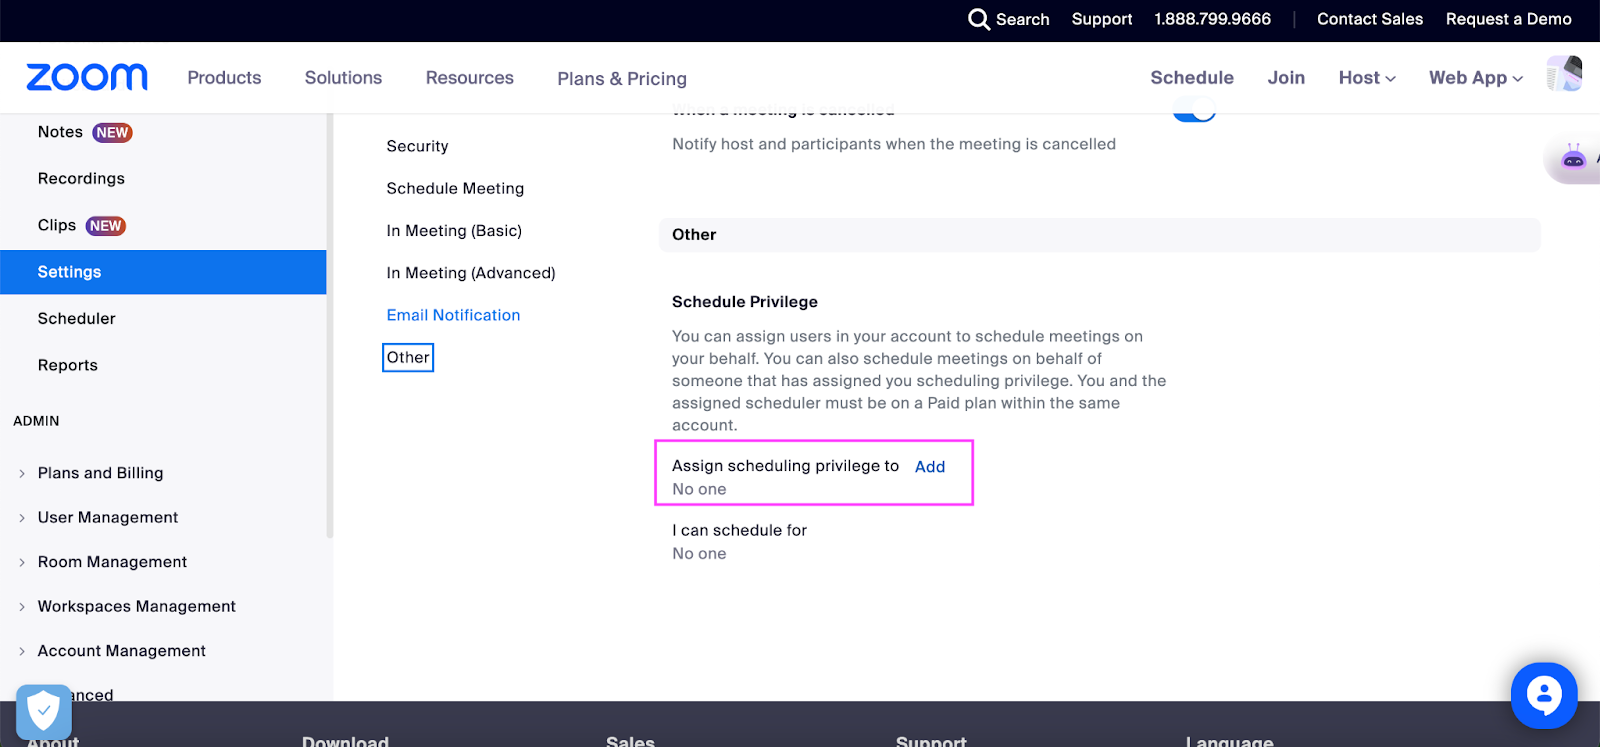 Create a Zoom meeting on mobile app - Assign scheduling privileges to others